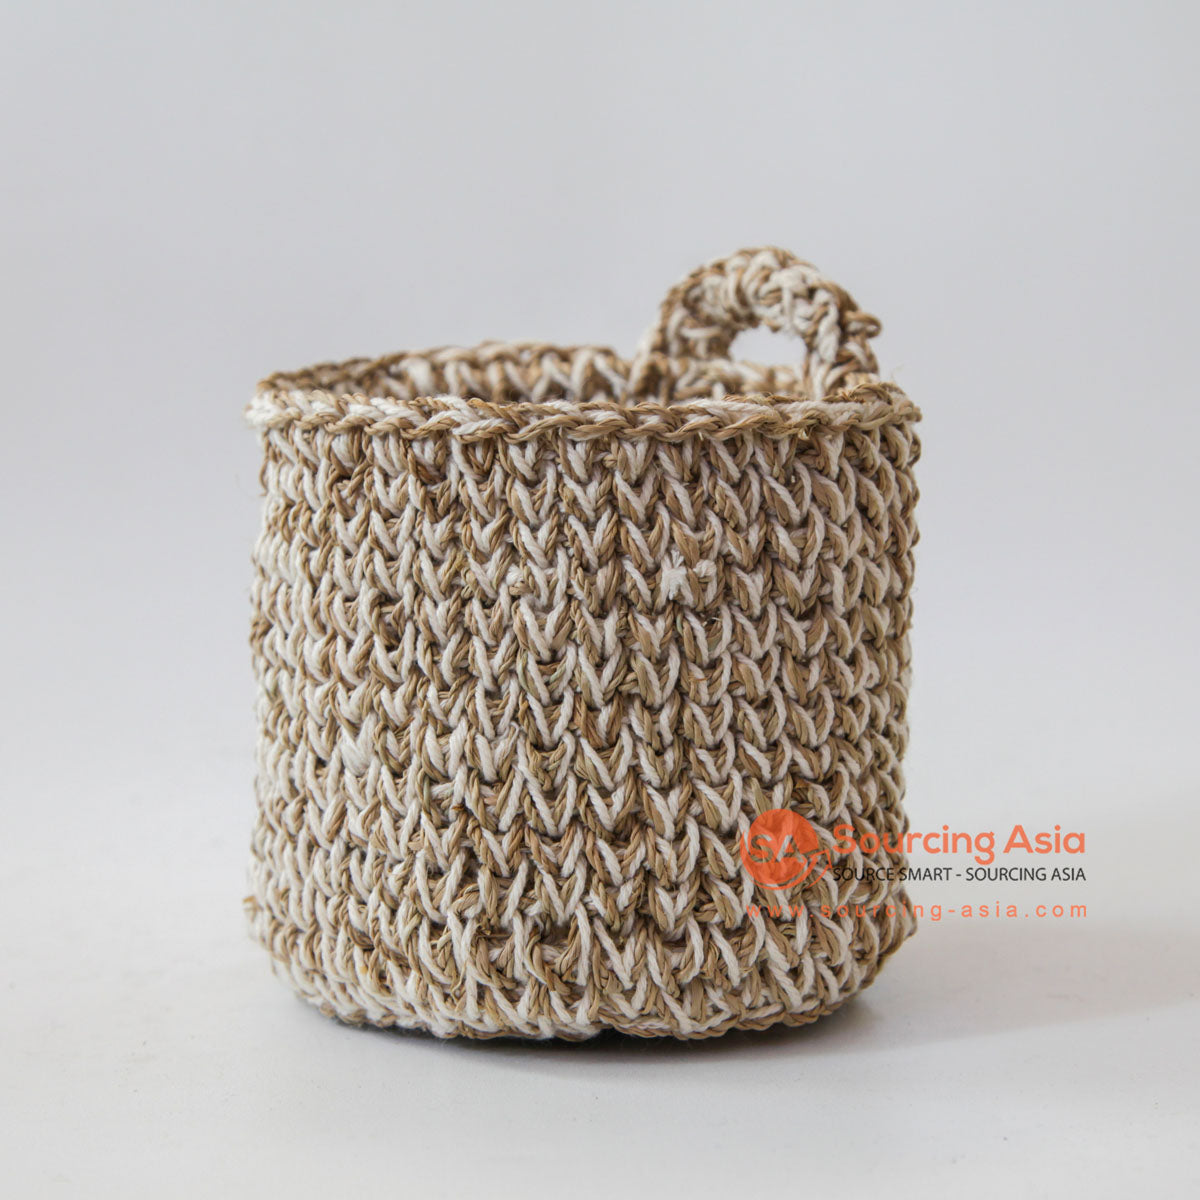 DHL131 NATURAL MACRAME SMALL BASKET WITH HANDLE